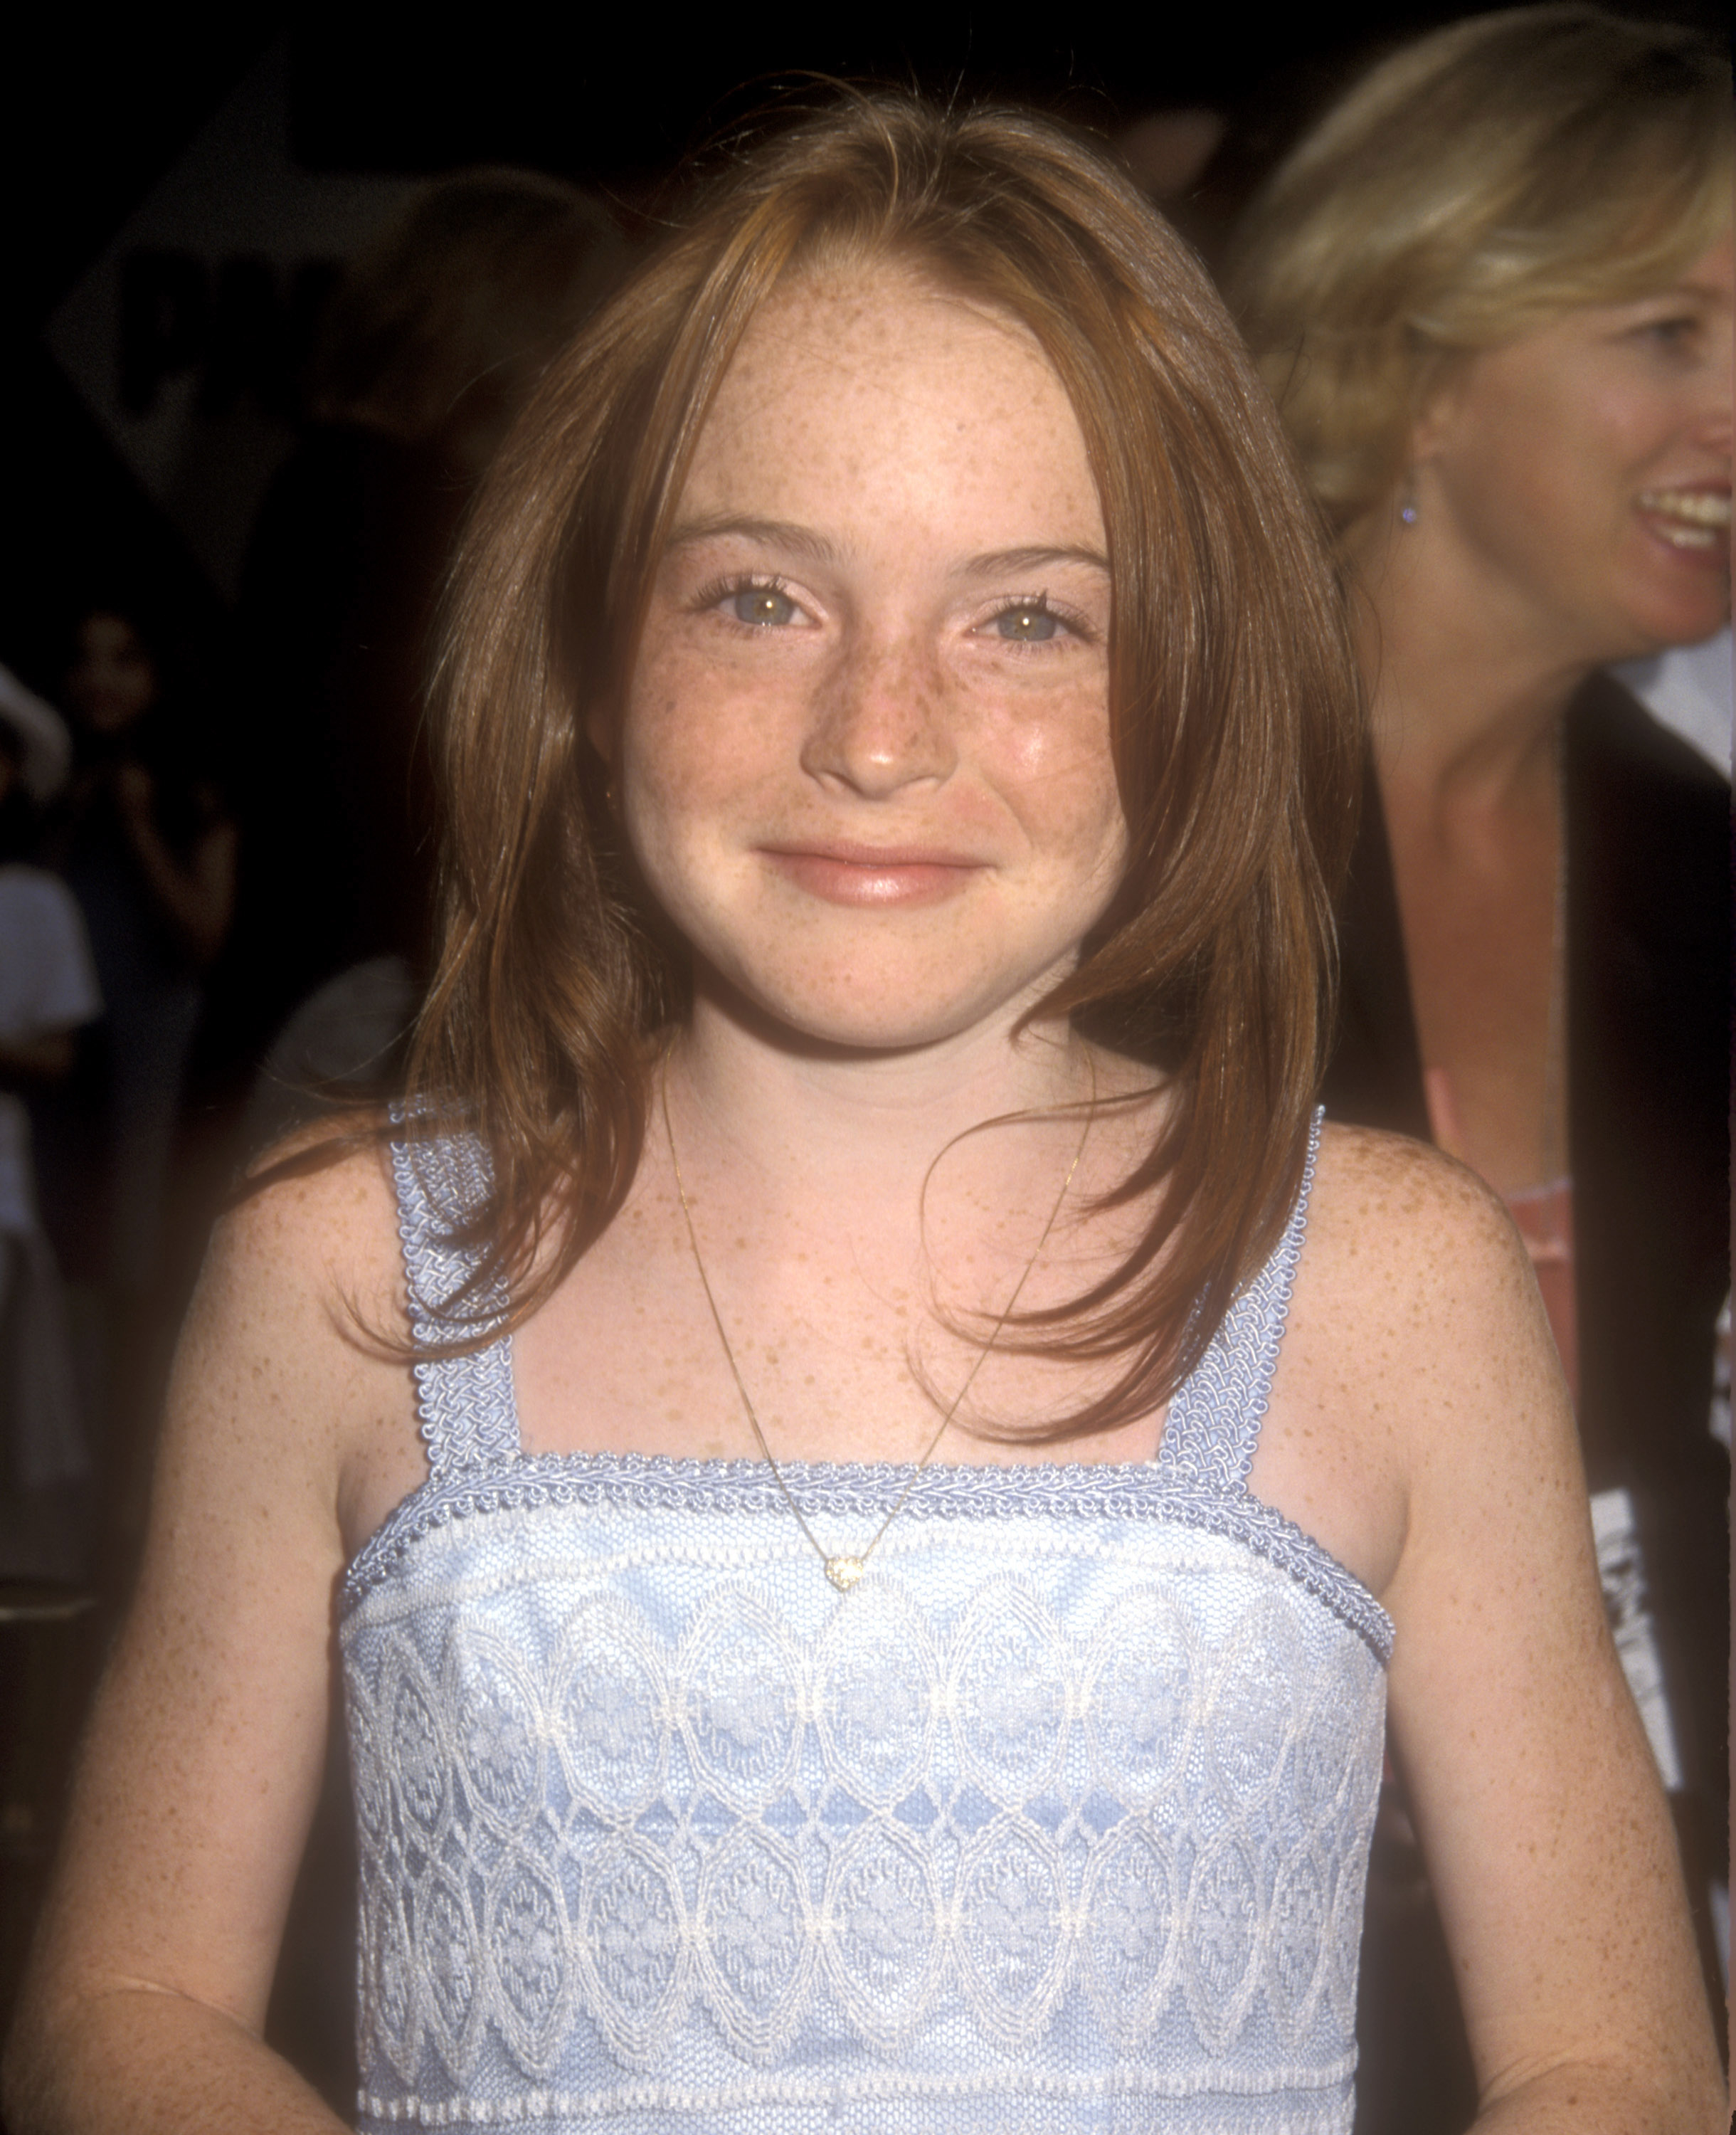 A smiling young Lindsay wearing a sleeveless top stands on the red carpet